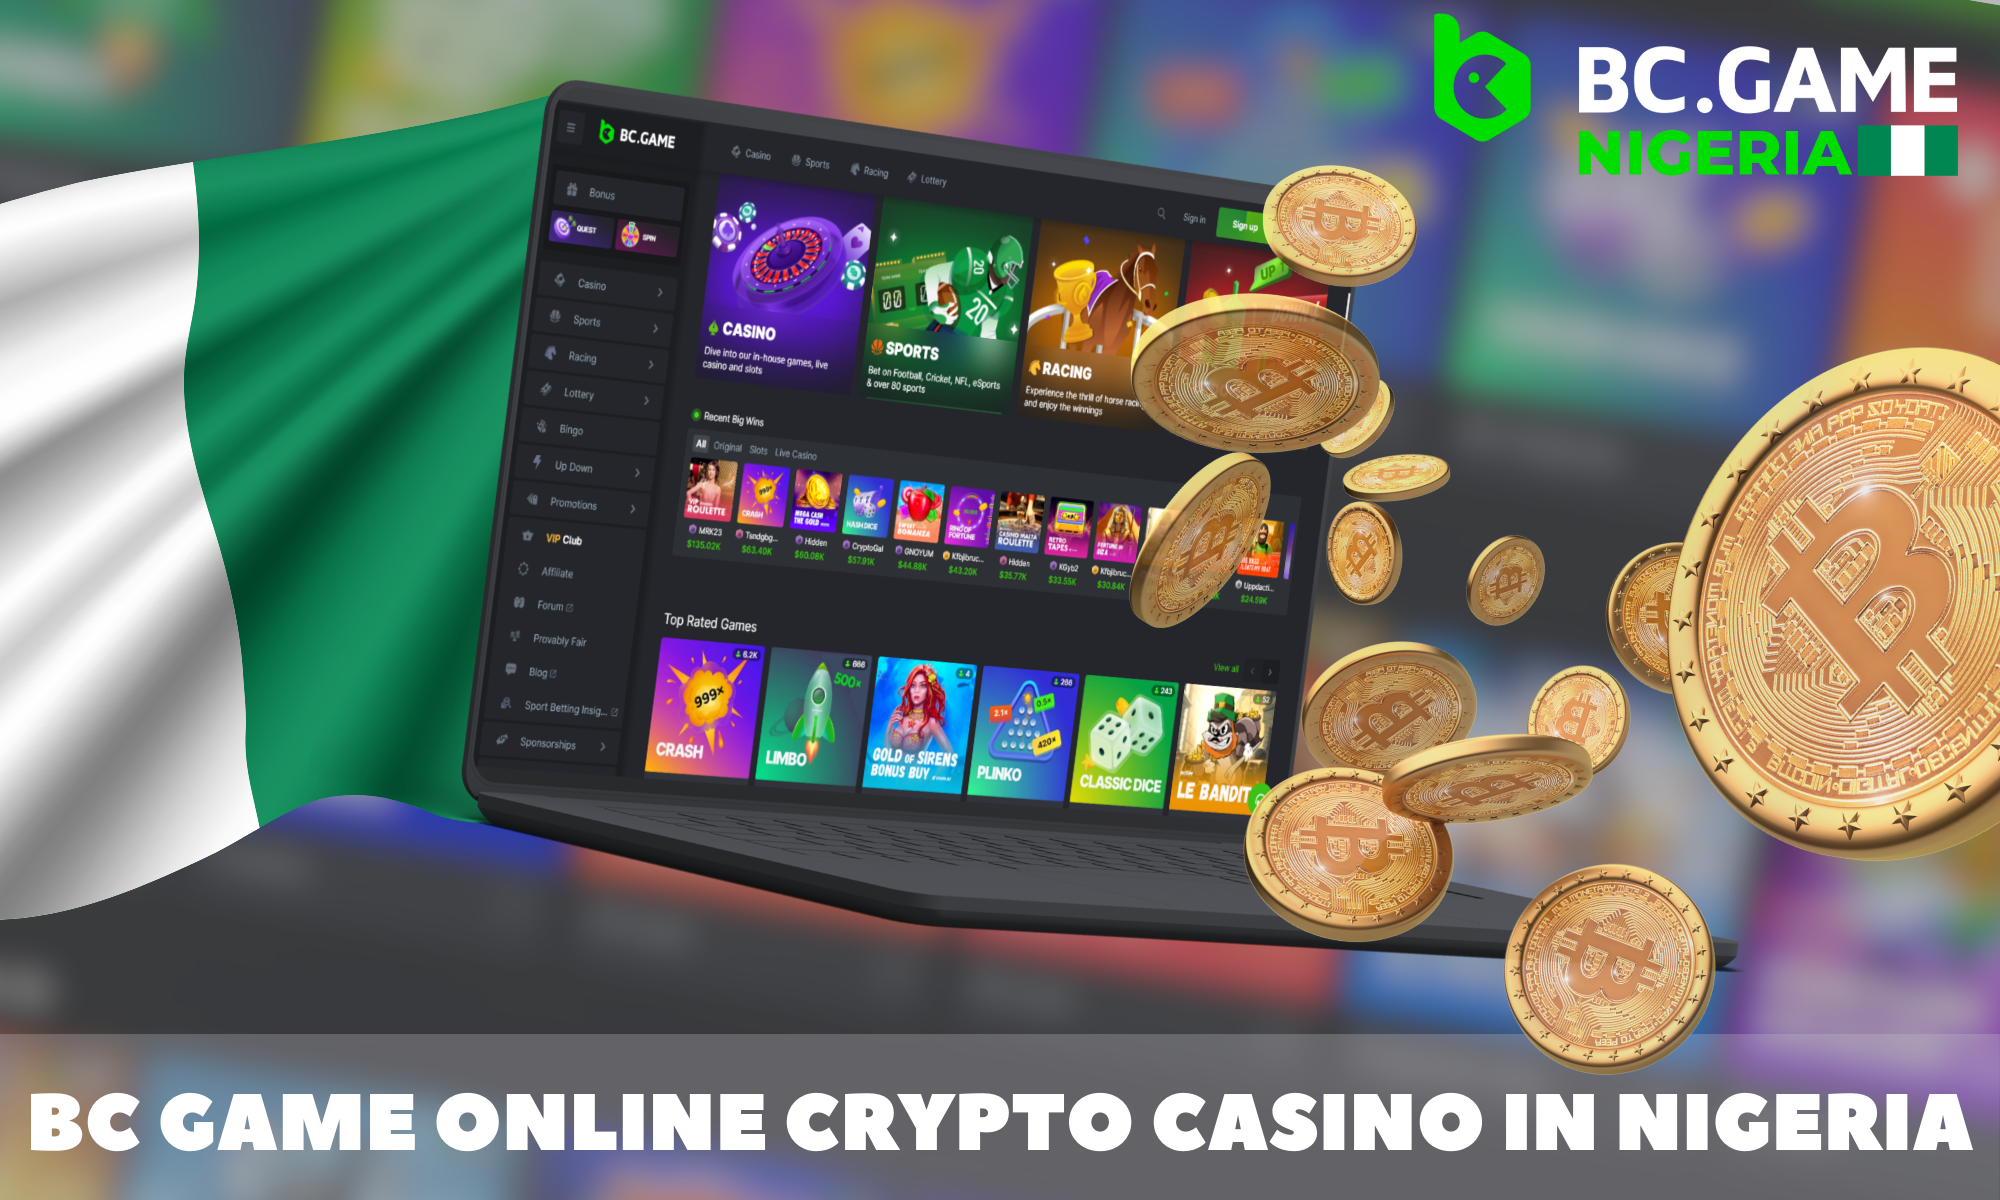 BC Game Cryptocurrency Casino Available for Nigerian Players 24/7